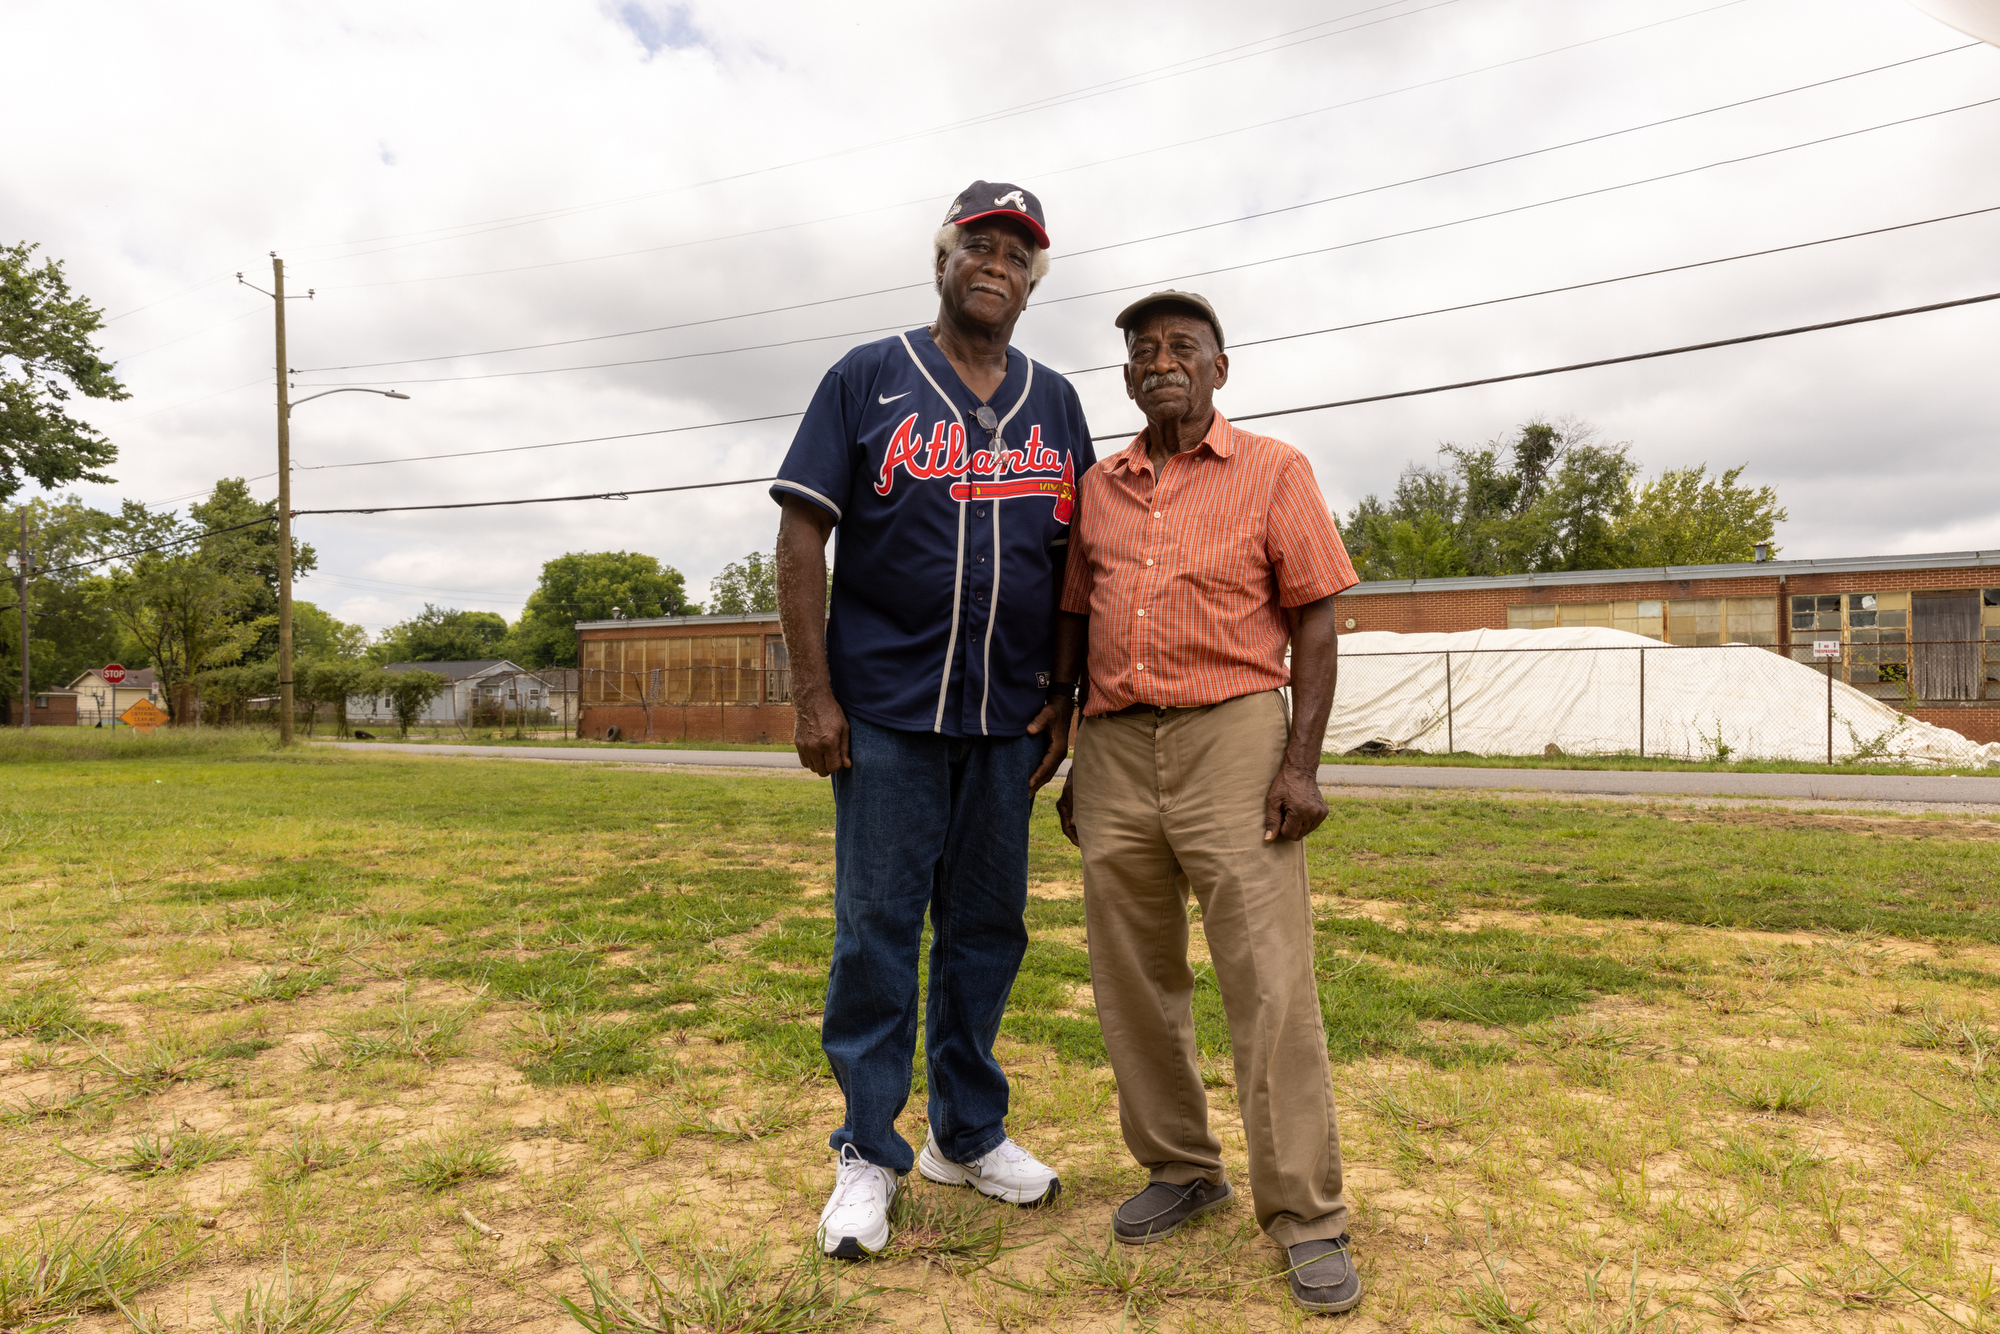 Longtime Collegeville residents Chester Wallace (left) and Jimmy Smith (right) stand in front of the former Carver High School. After the EPA excavates contaminated soil from properties in the Superfund site, the agency stores it under a white tarp until it can be hauled away to a disposal site. Credit: Lynsey Weatherspoon for ProPublica